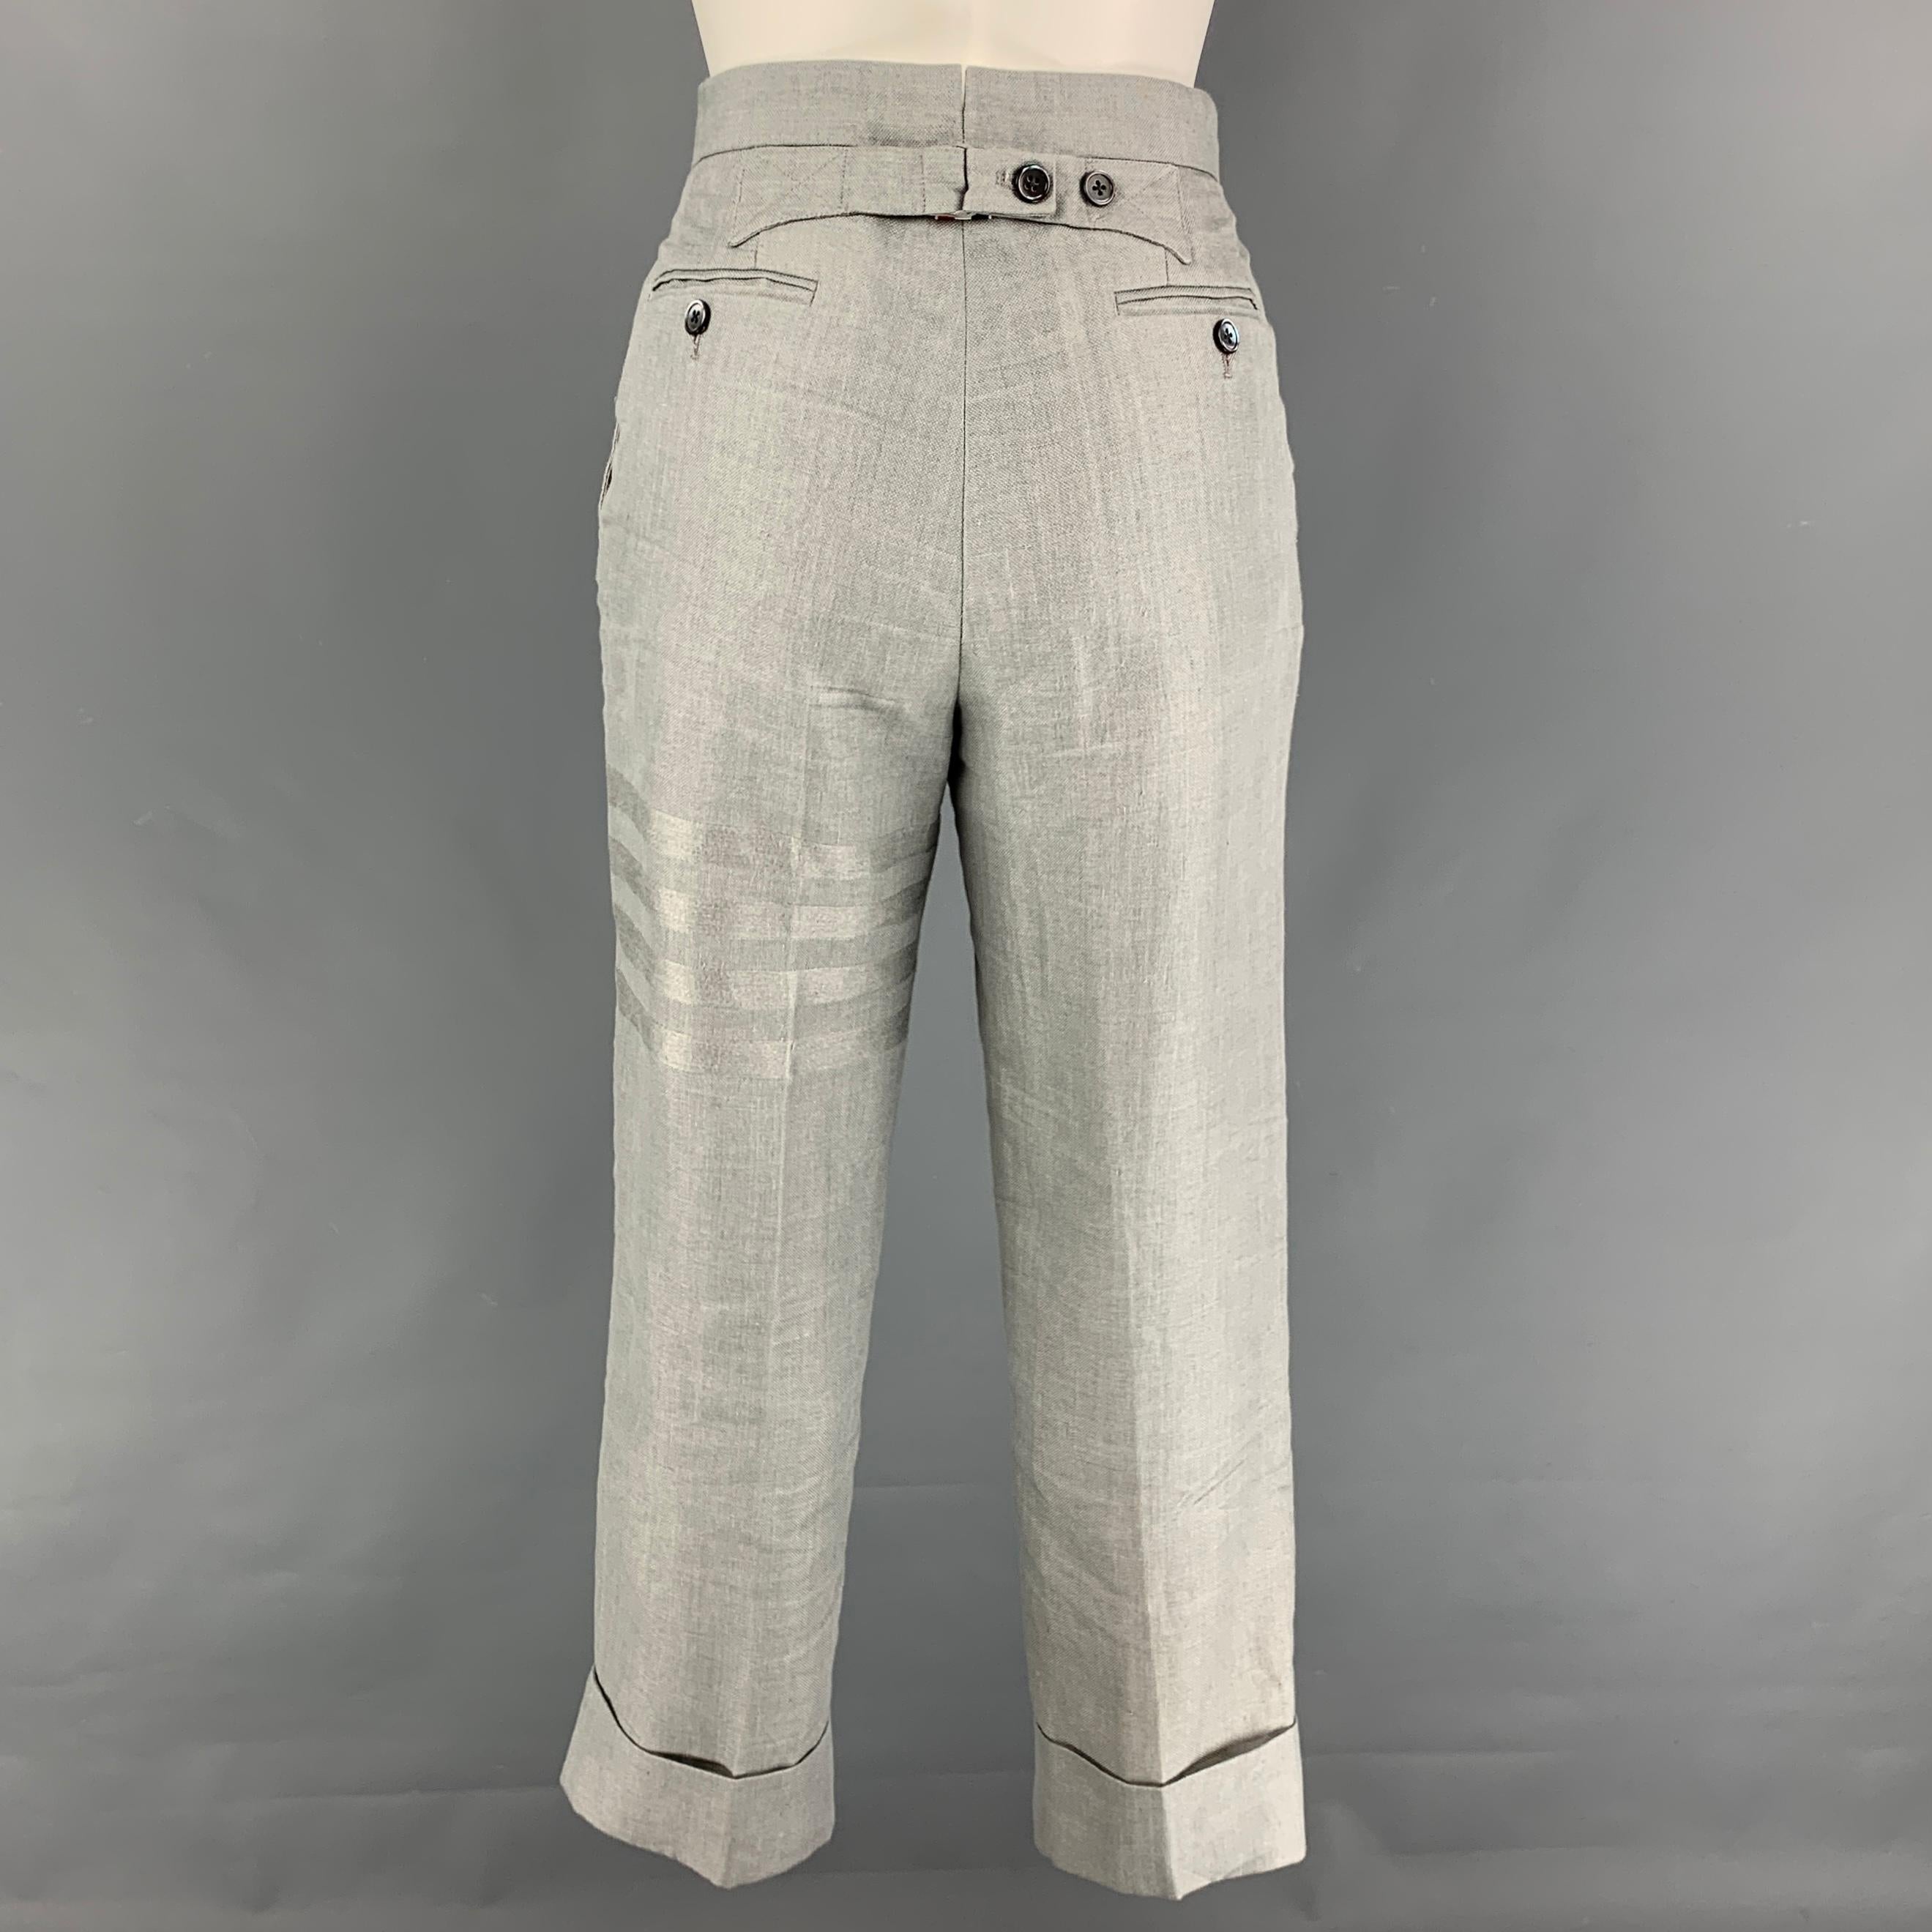 THOM BROWNE casual pants comes in a light gray linen featuring a high waist, cuffed leg, pleated, front tab, and a button fly closure. Made in Italy.

Very Good Pre-Owned Condition.
Marked: 36
Original Retail Price: $1,280.00

Measurements:

Waist: